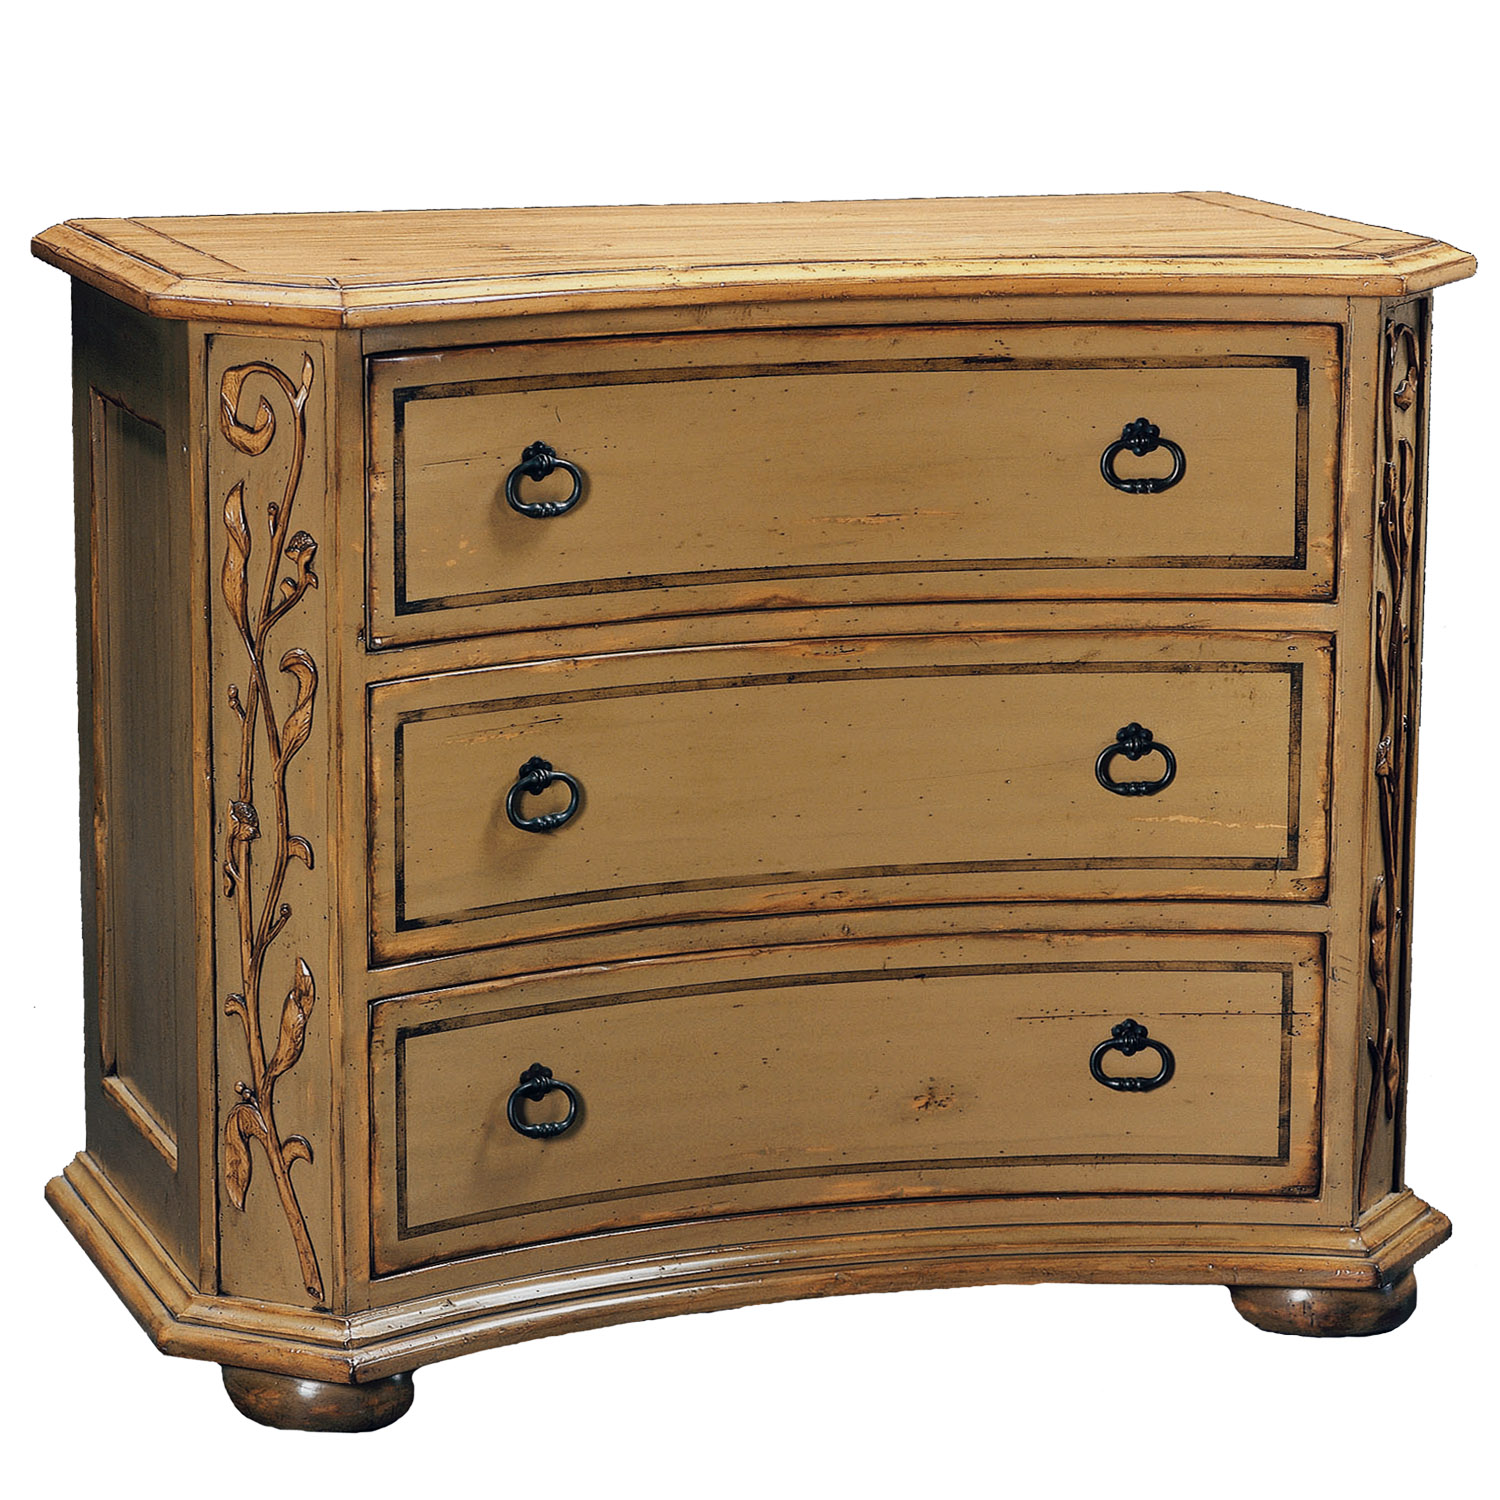 Lucretia traditional chest of drawers dresser with carved vine motif by Woodland furniture in Idaho Falls